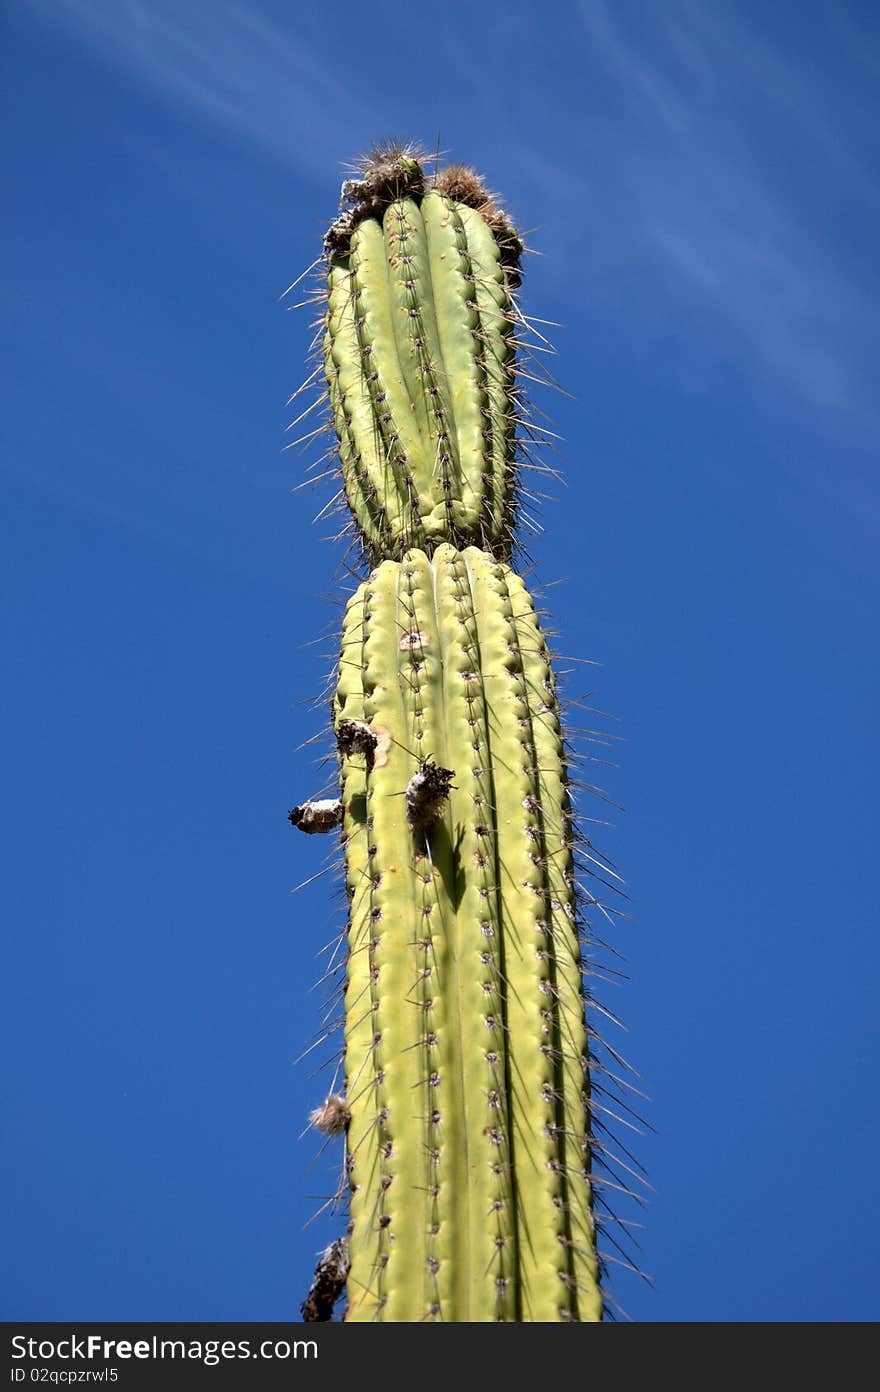 Tall cactus with blue sky in the background. Tall cactus with blue sky in the background